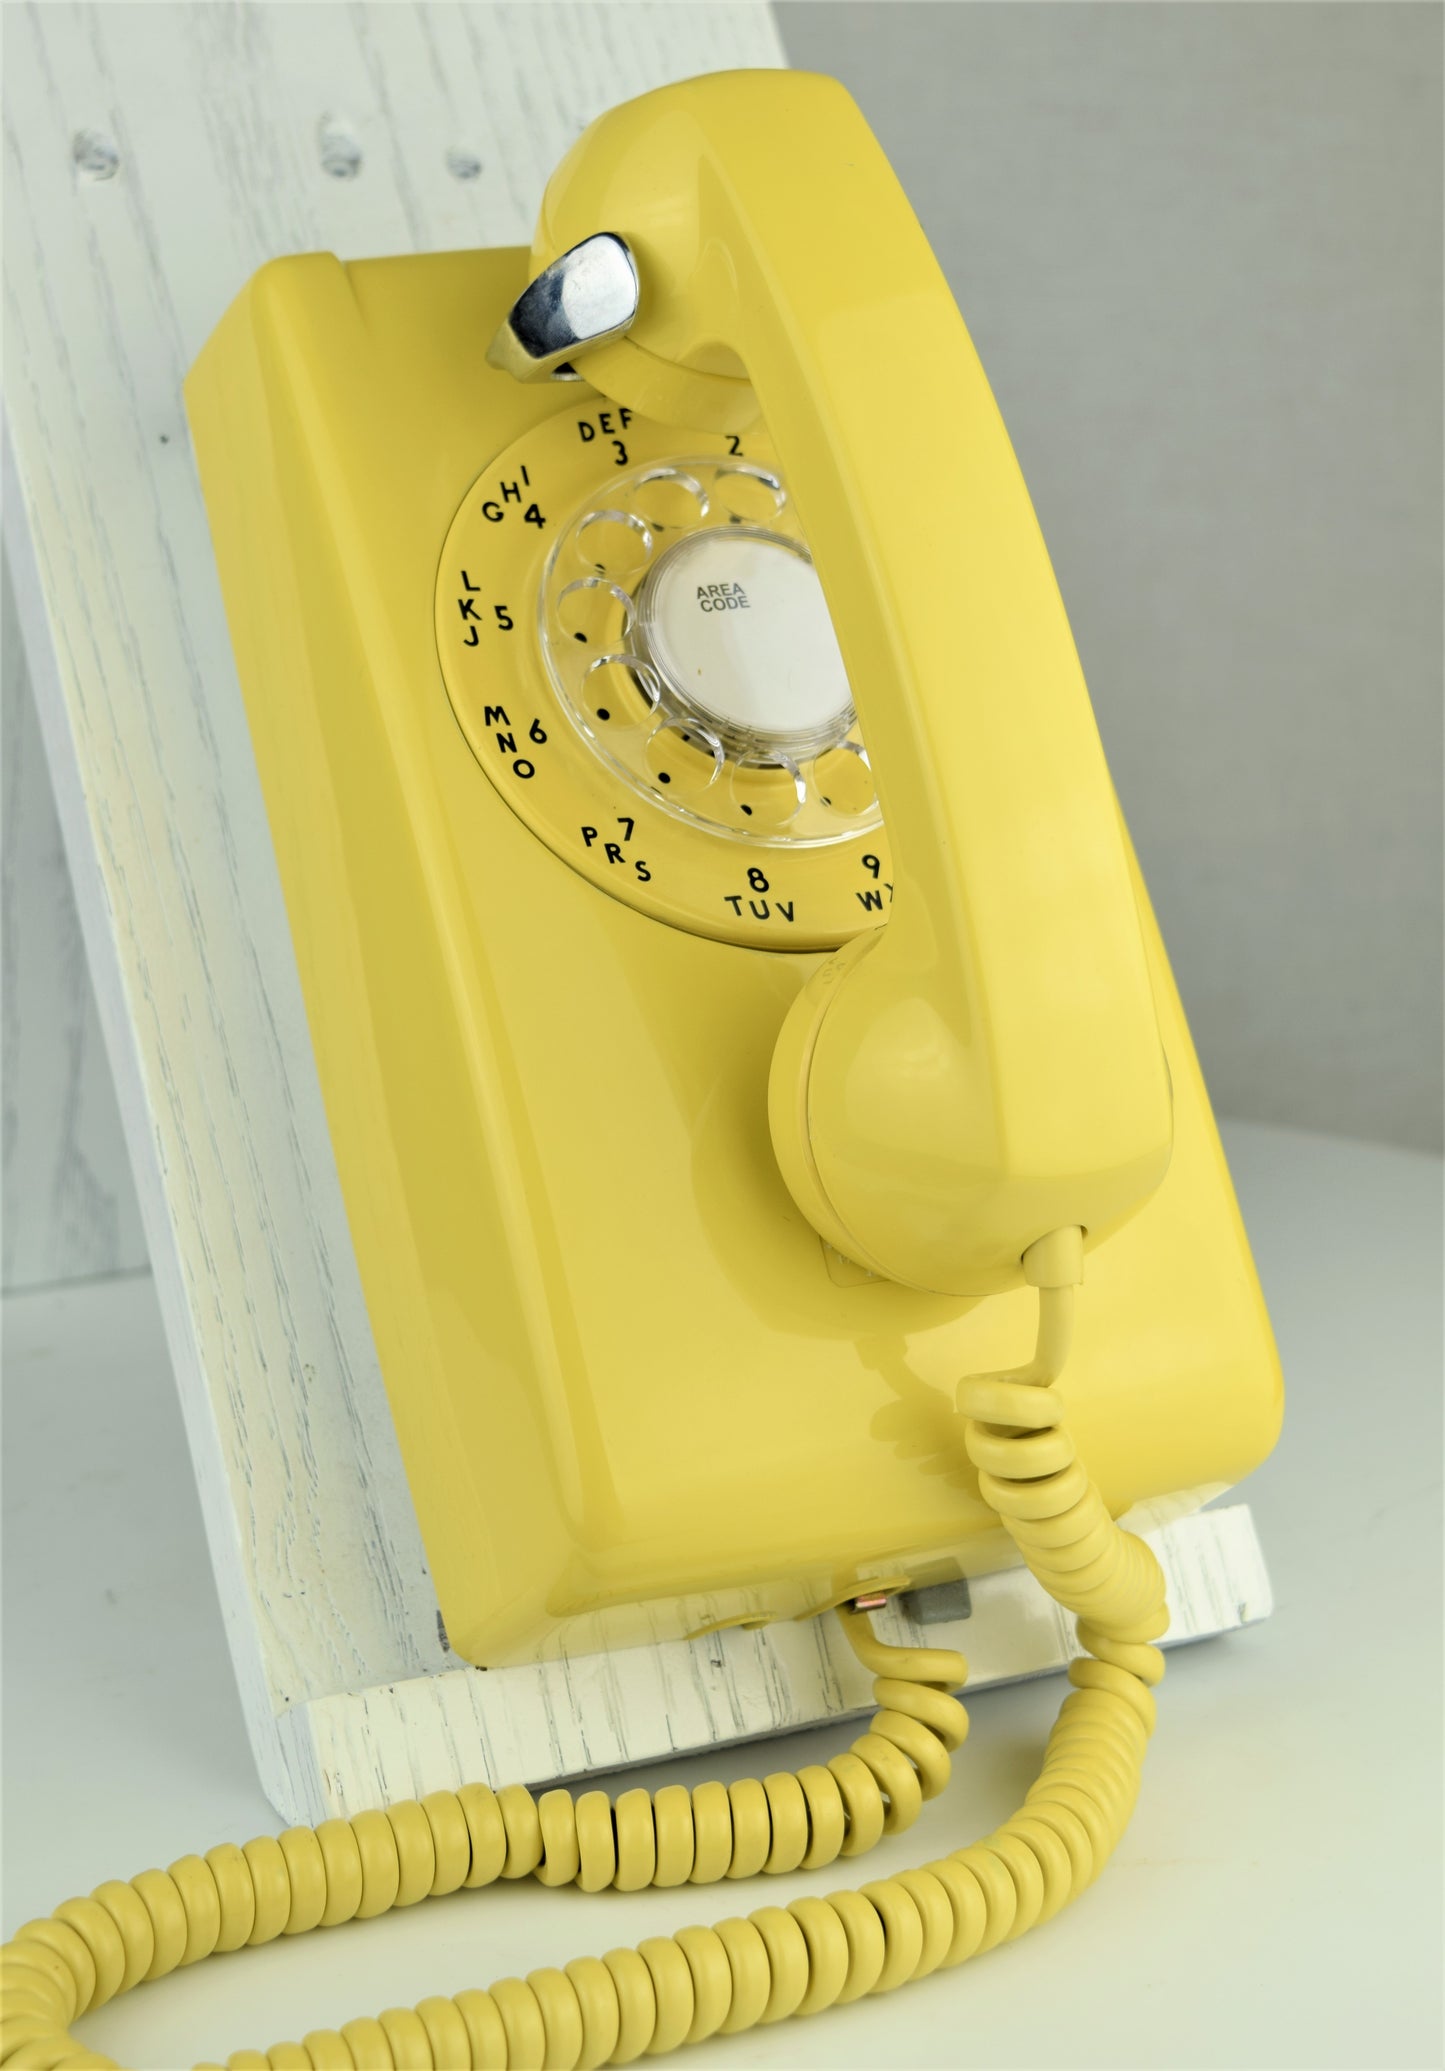 Yellow 554 Wall Telephone - Fully Restored and Working